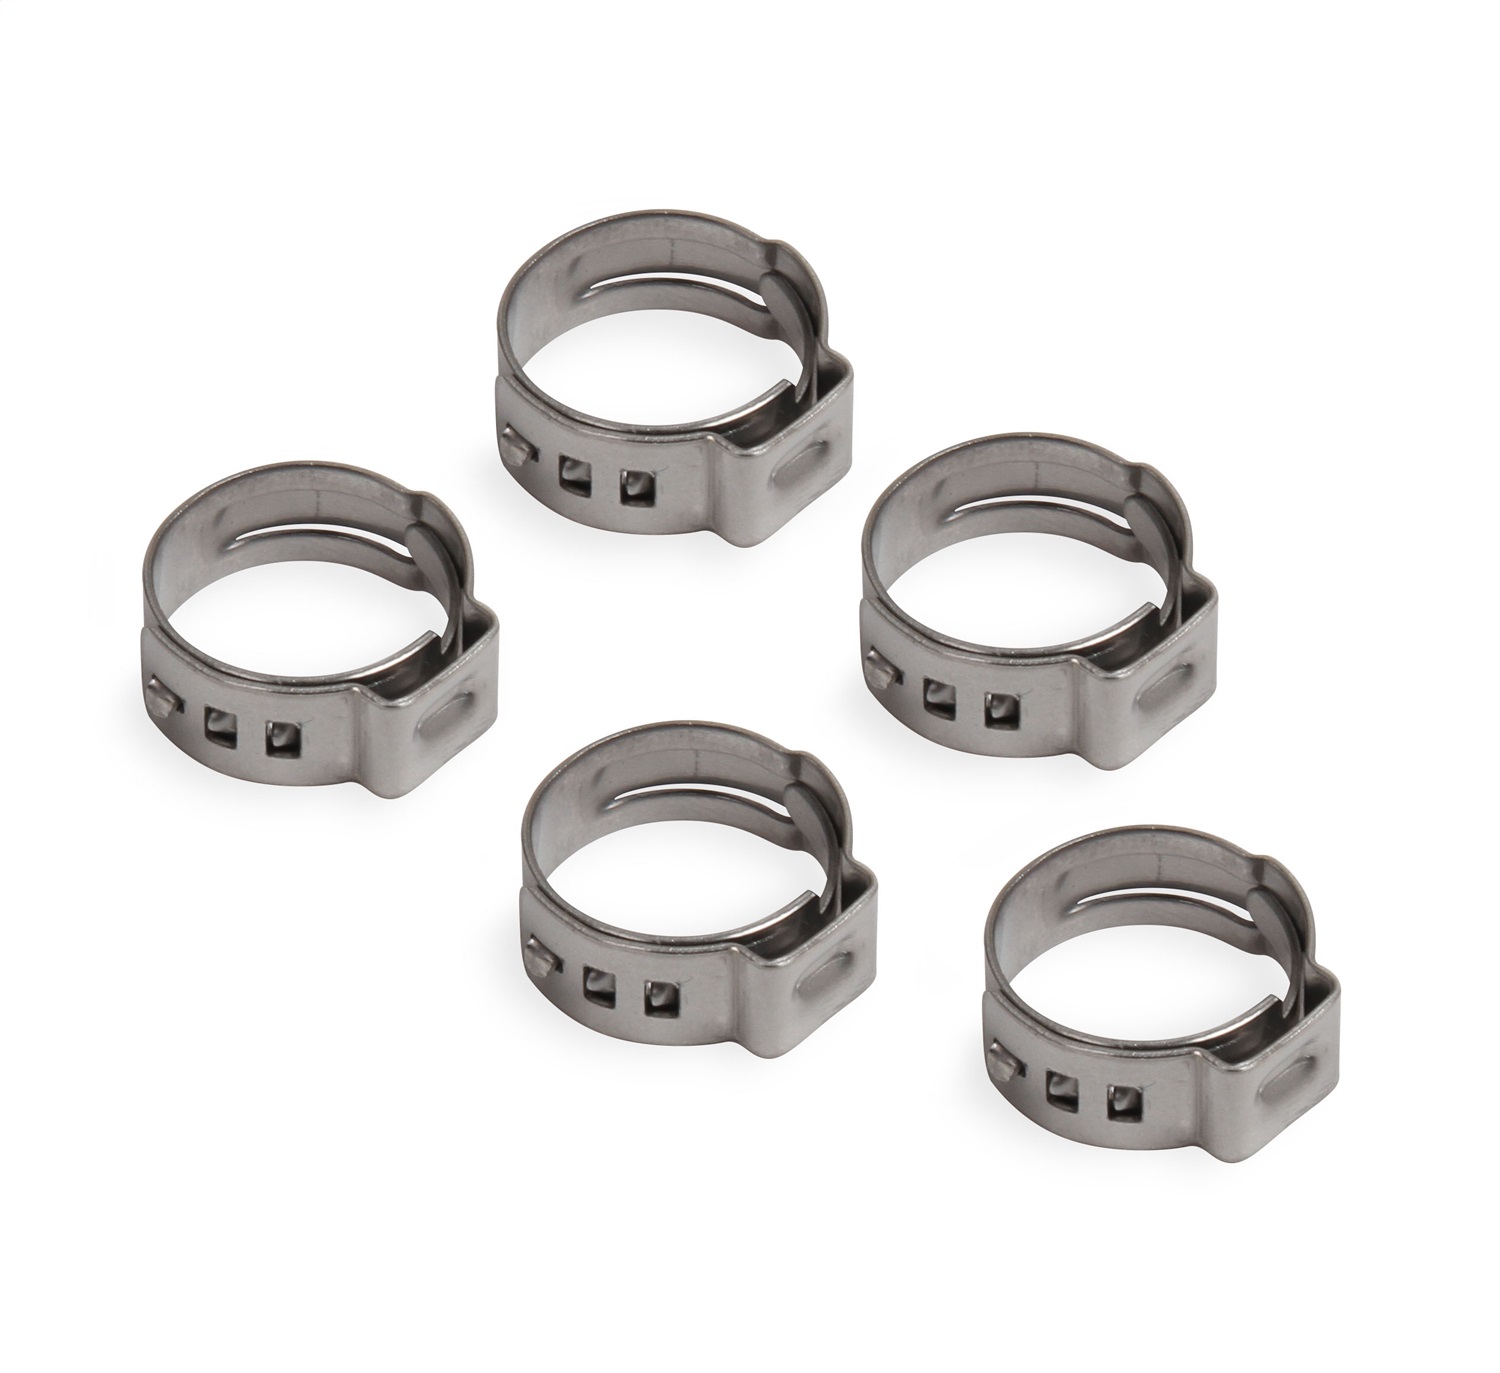 Vapor Guard Hose Clamp; Size: 3/8 in.; 1 Ear Crimp Style; Package of 5; - 750010ERL